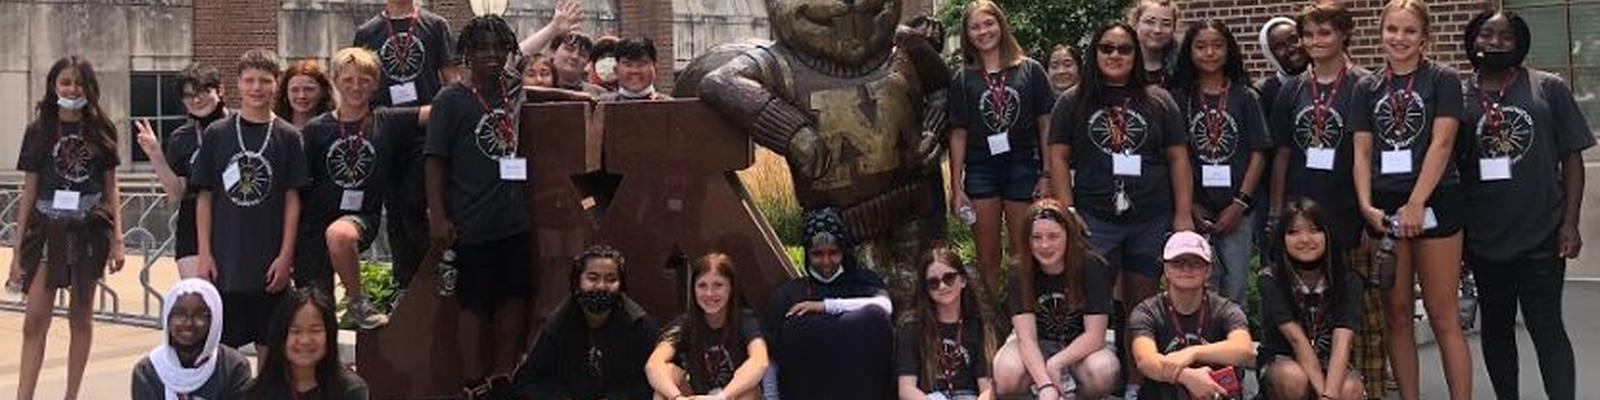 Group of students posing with gold statue of Goldy Gopher